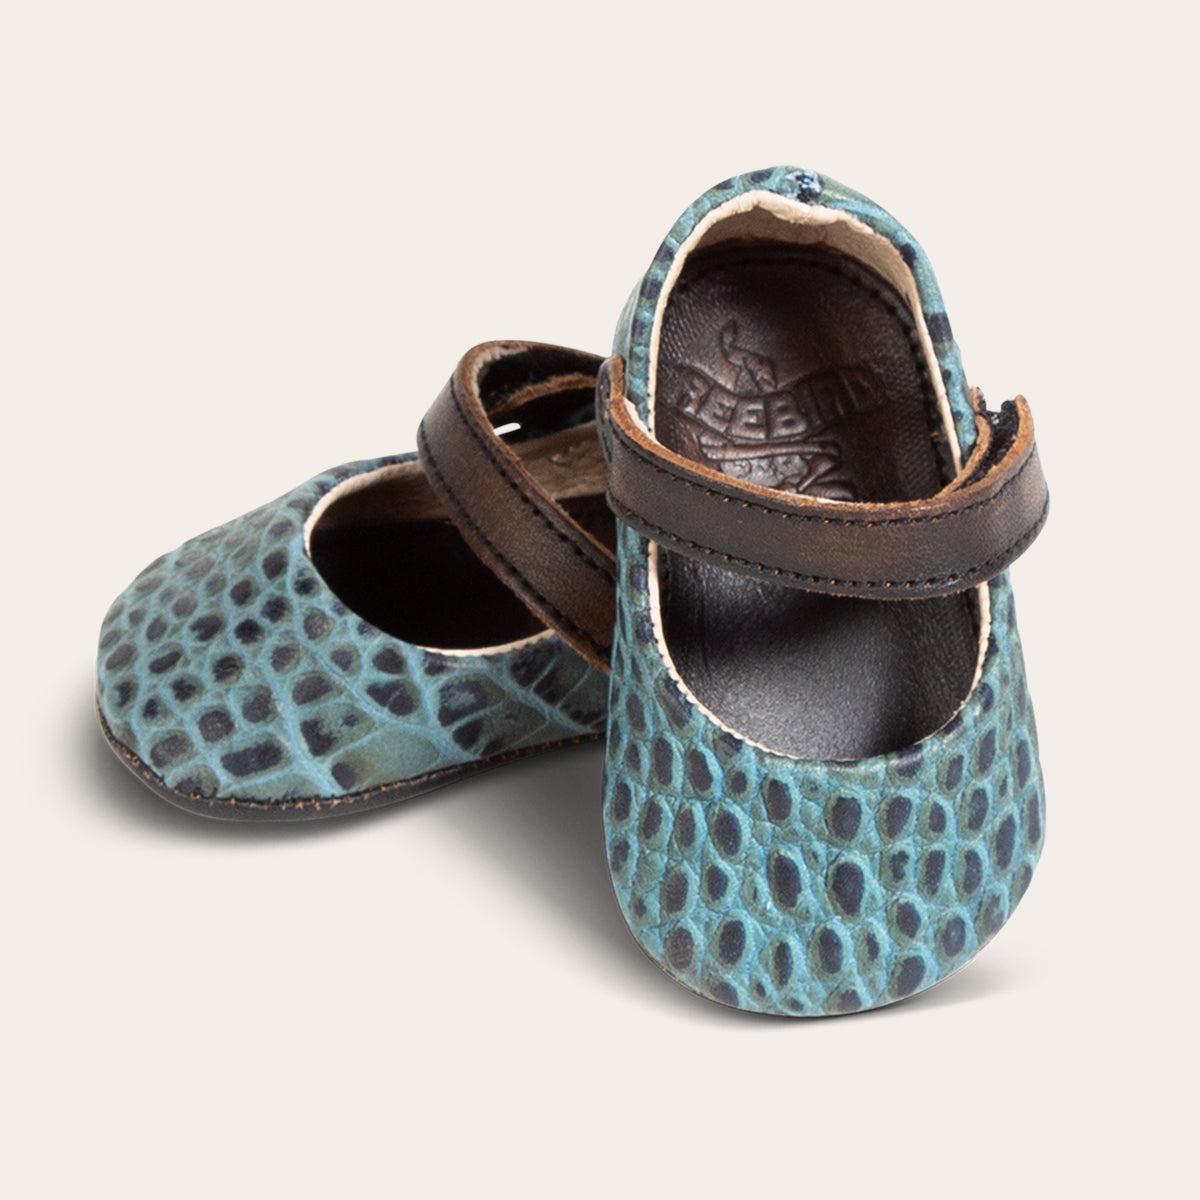 front view showing top leather strap on FREEBIRD infant baby Jane turquoise croco leather shoe